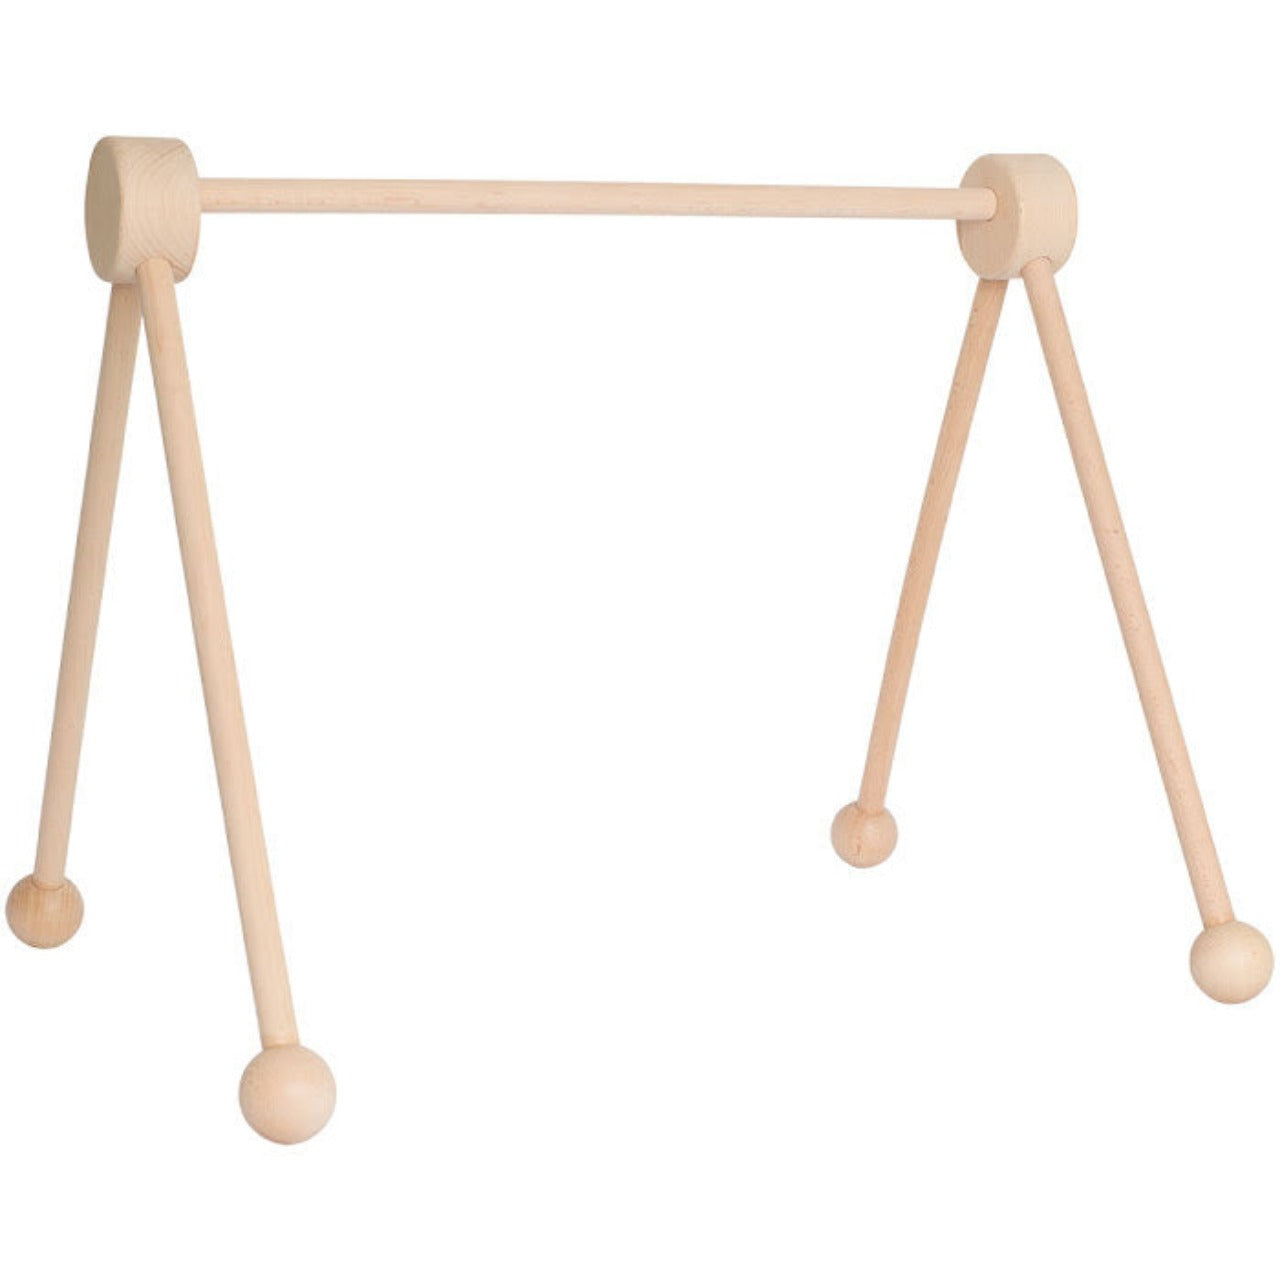 Wooden baby gym (white or natural)